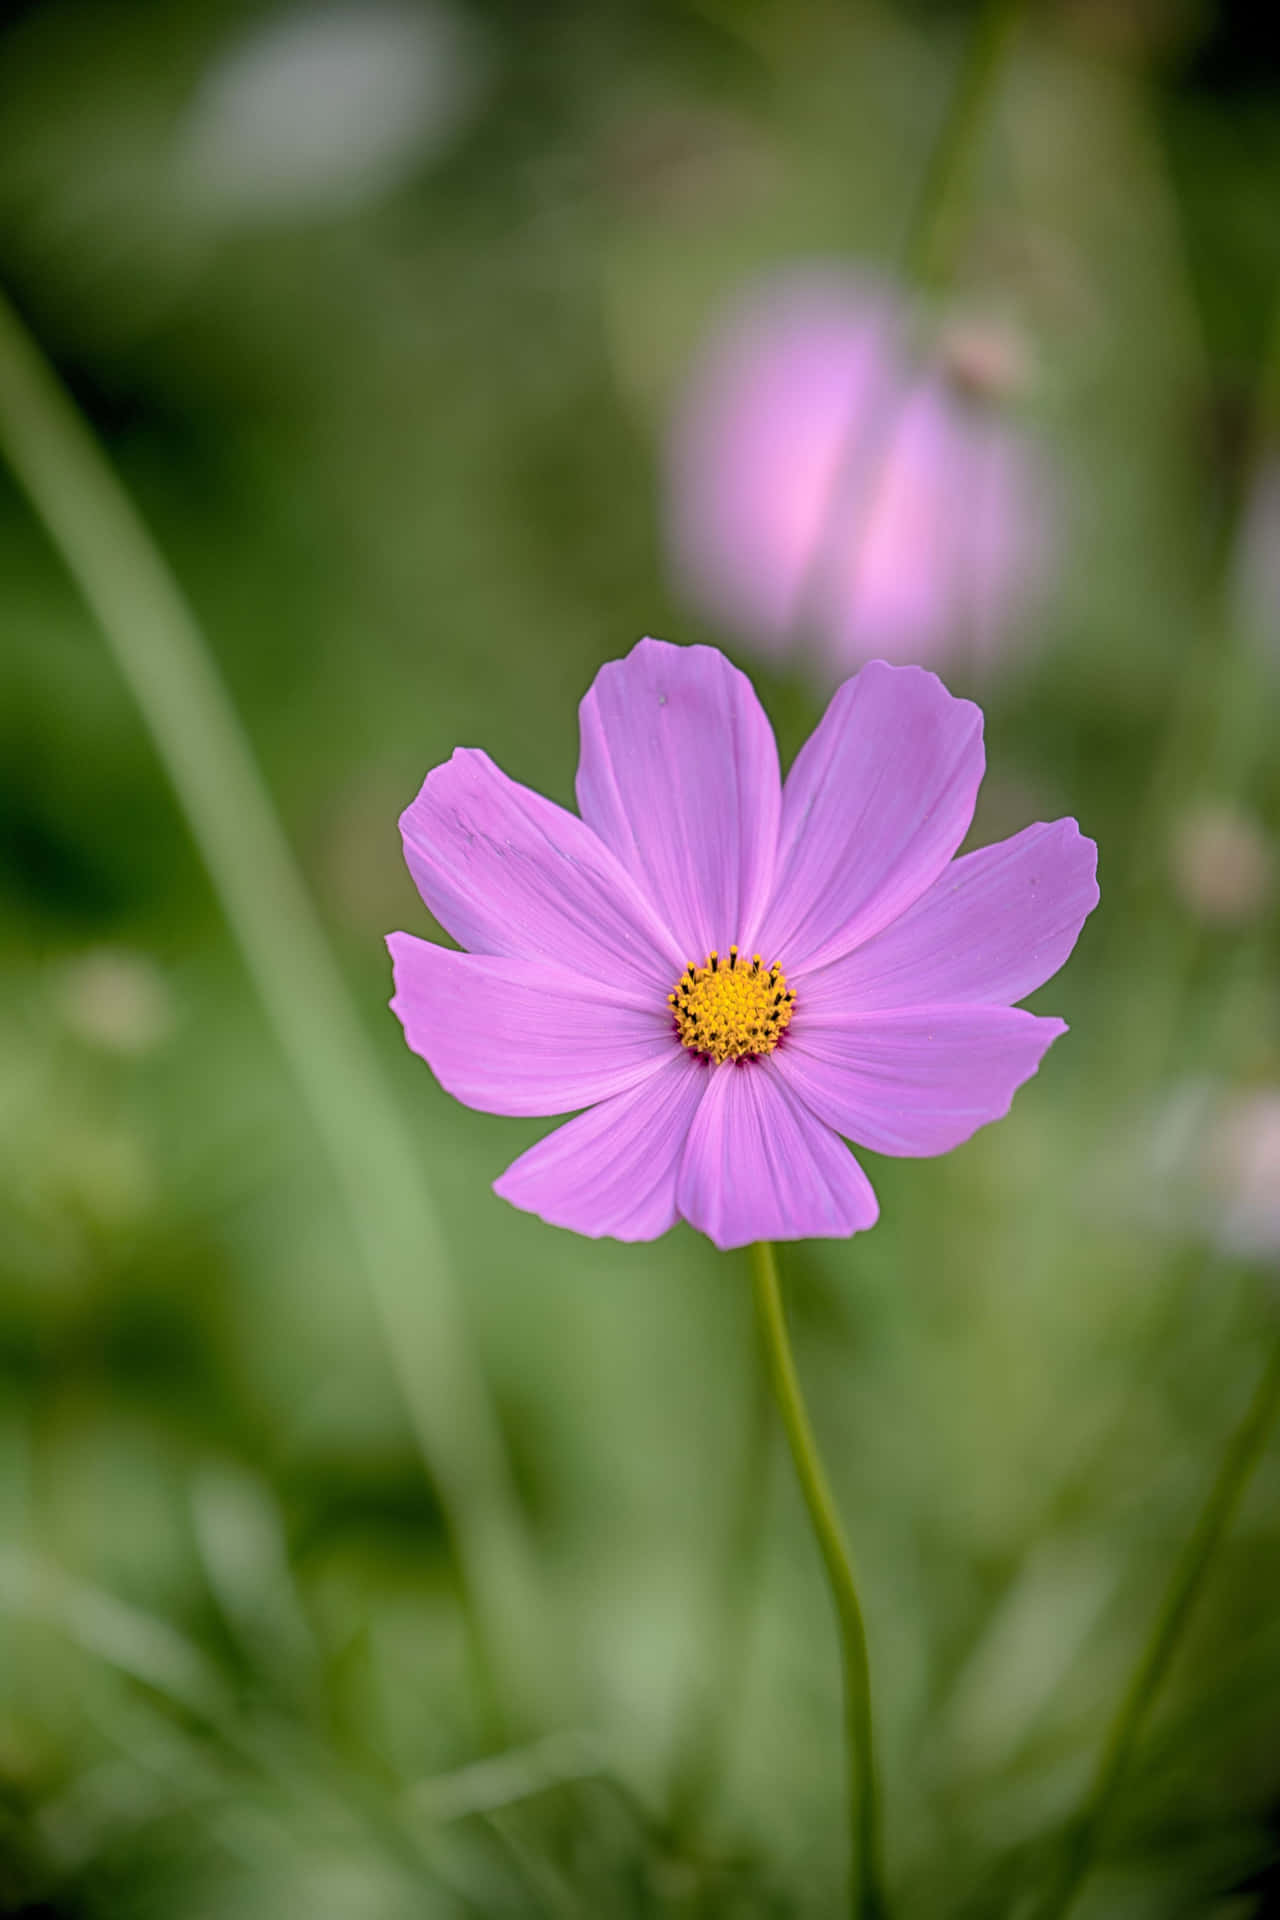 A Purple Flower Is Standing In The Grass